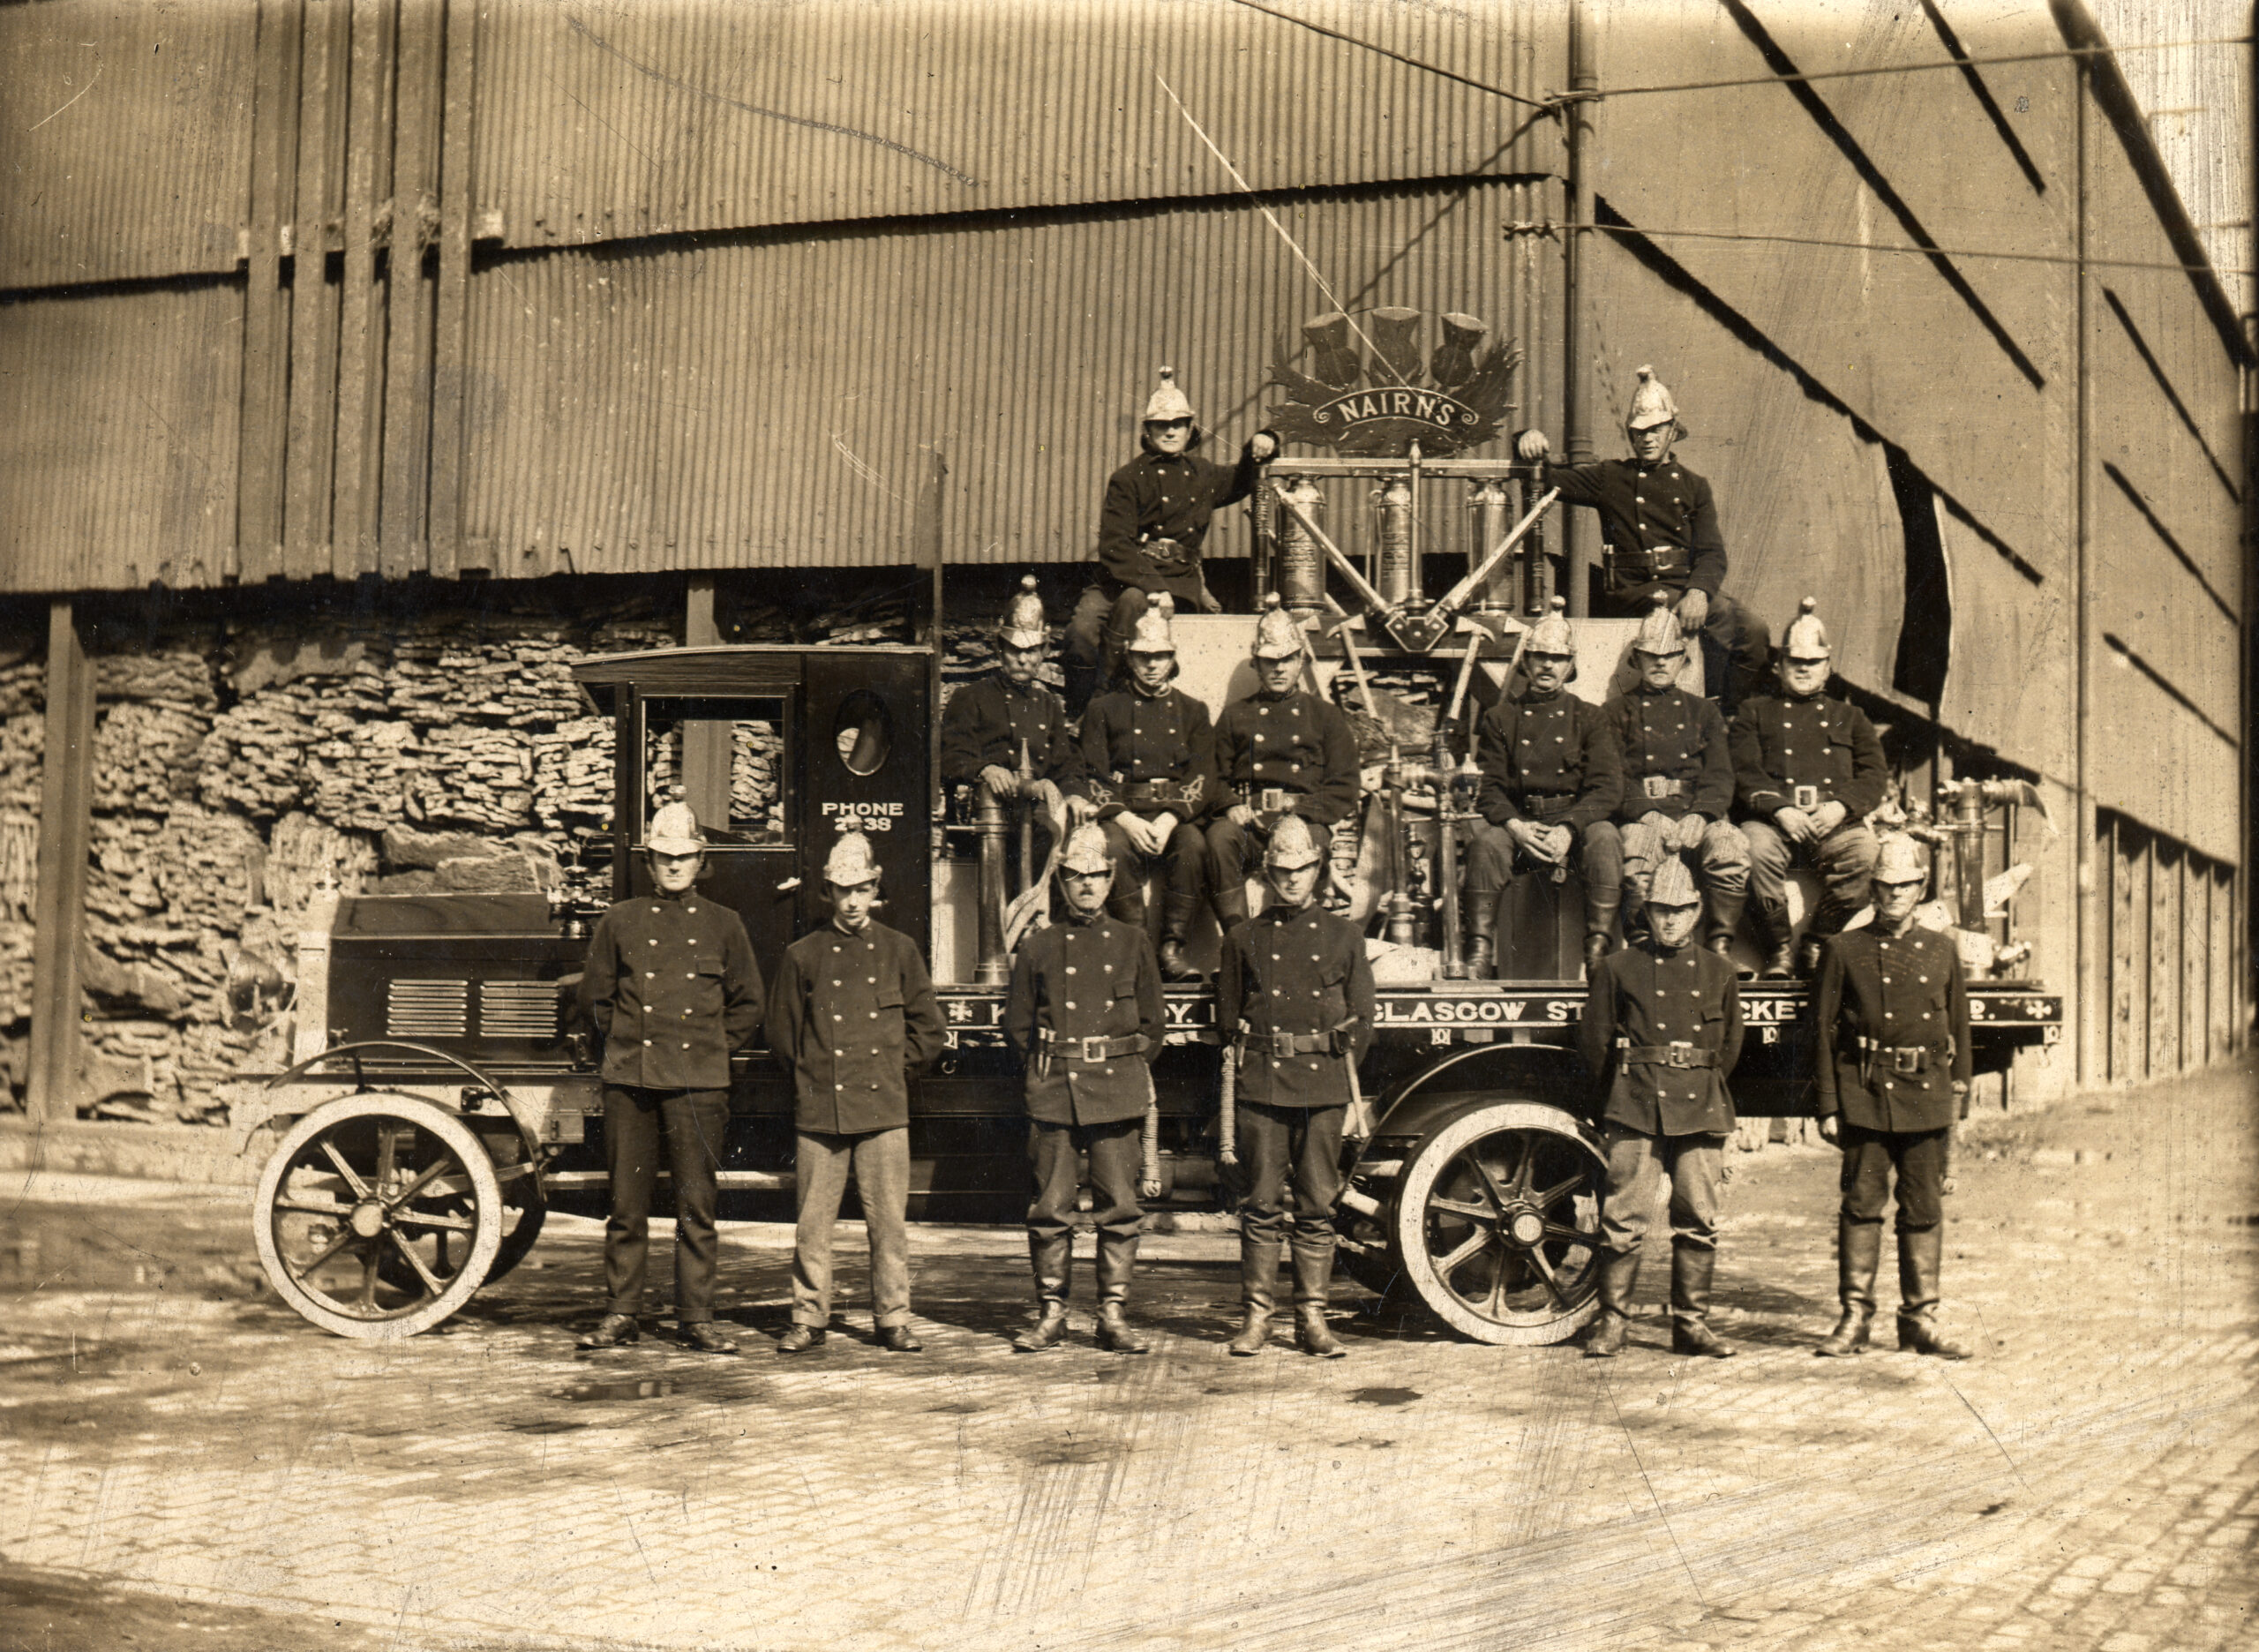 A black and white photograph of a group of men standing on a cart outside a factory. The men all wear dark uniforms, and dome-shaped helmets. A sign in the shape of a wooden thistle is balanced on top of the cart behind them.